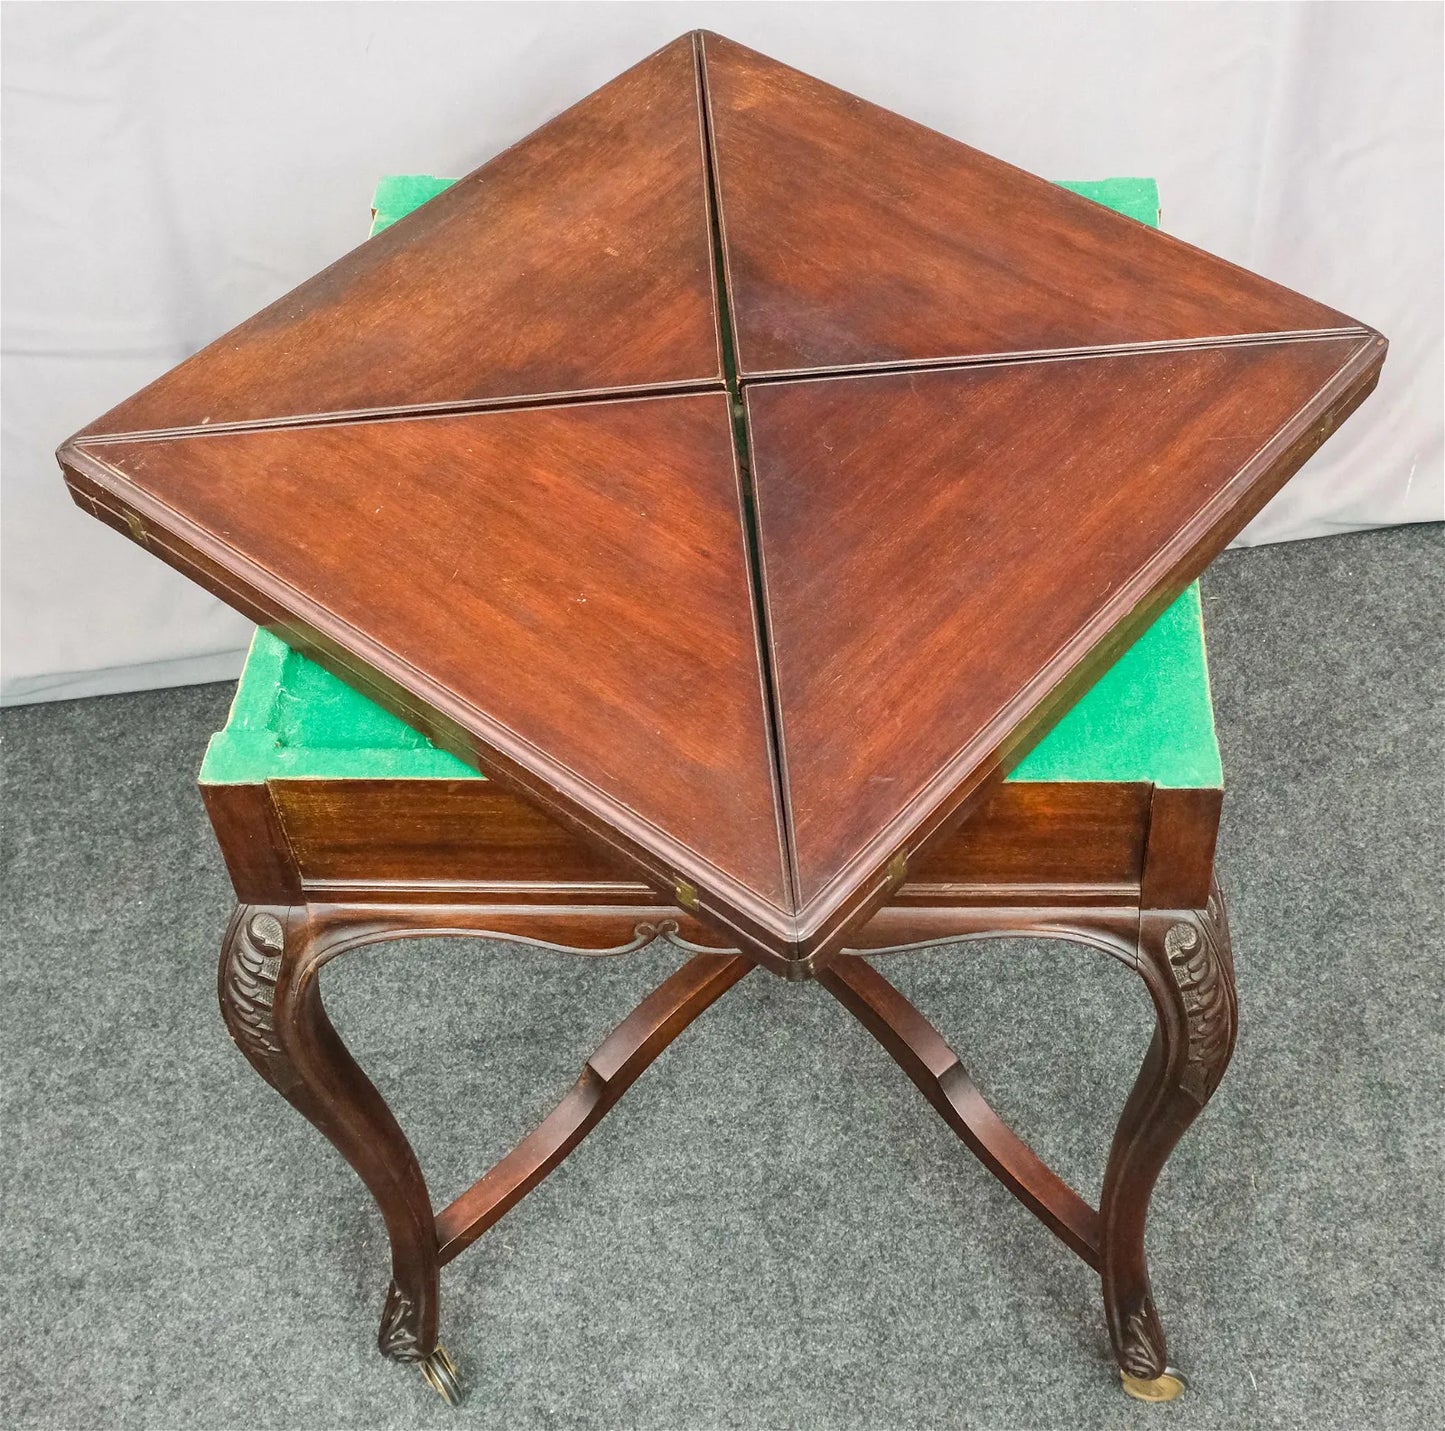 Late 19th C. Folding Envelope Games Table